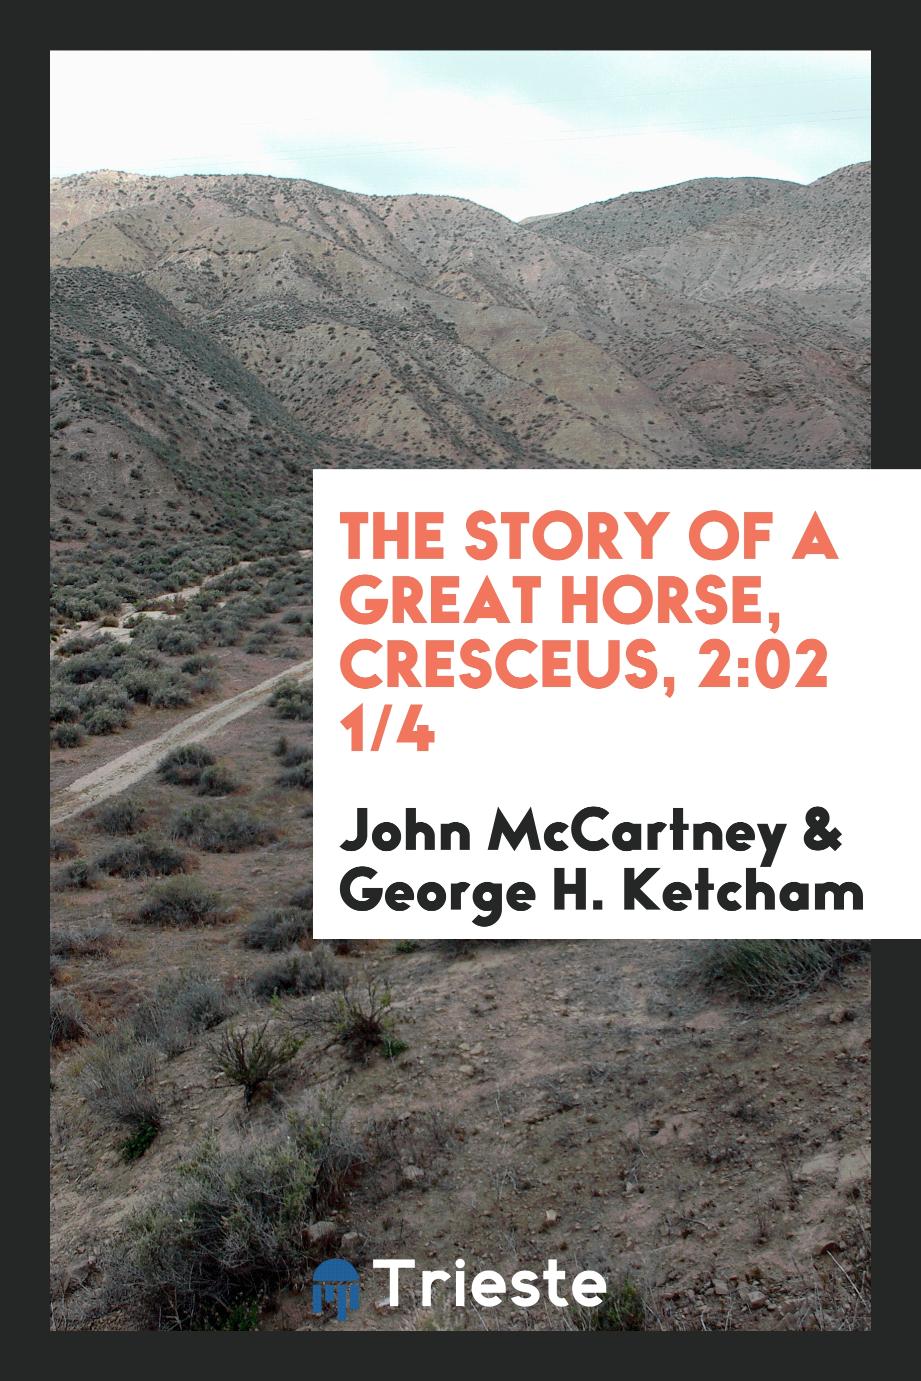 The story of a great horse, Cresceus, 2:02 1/4